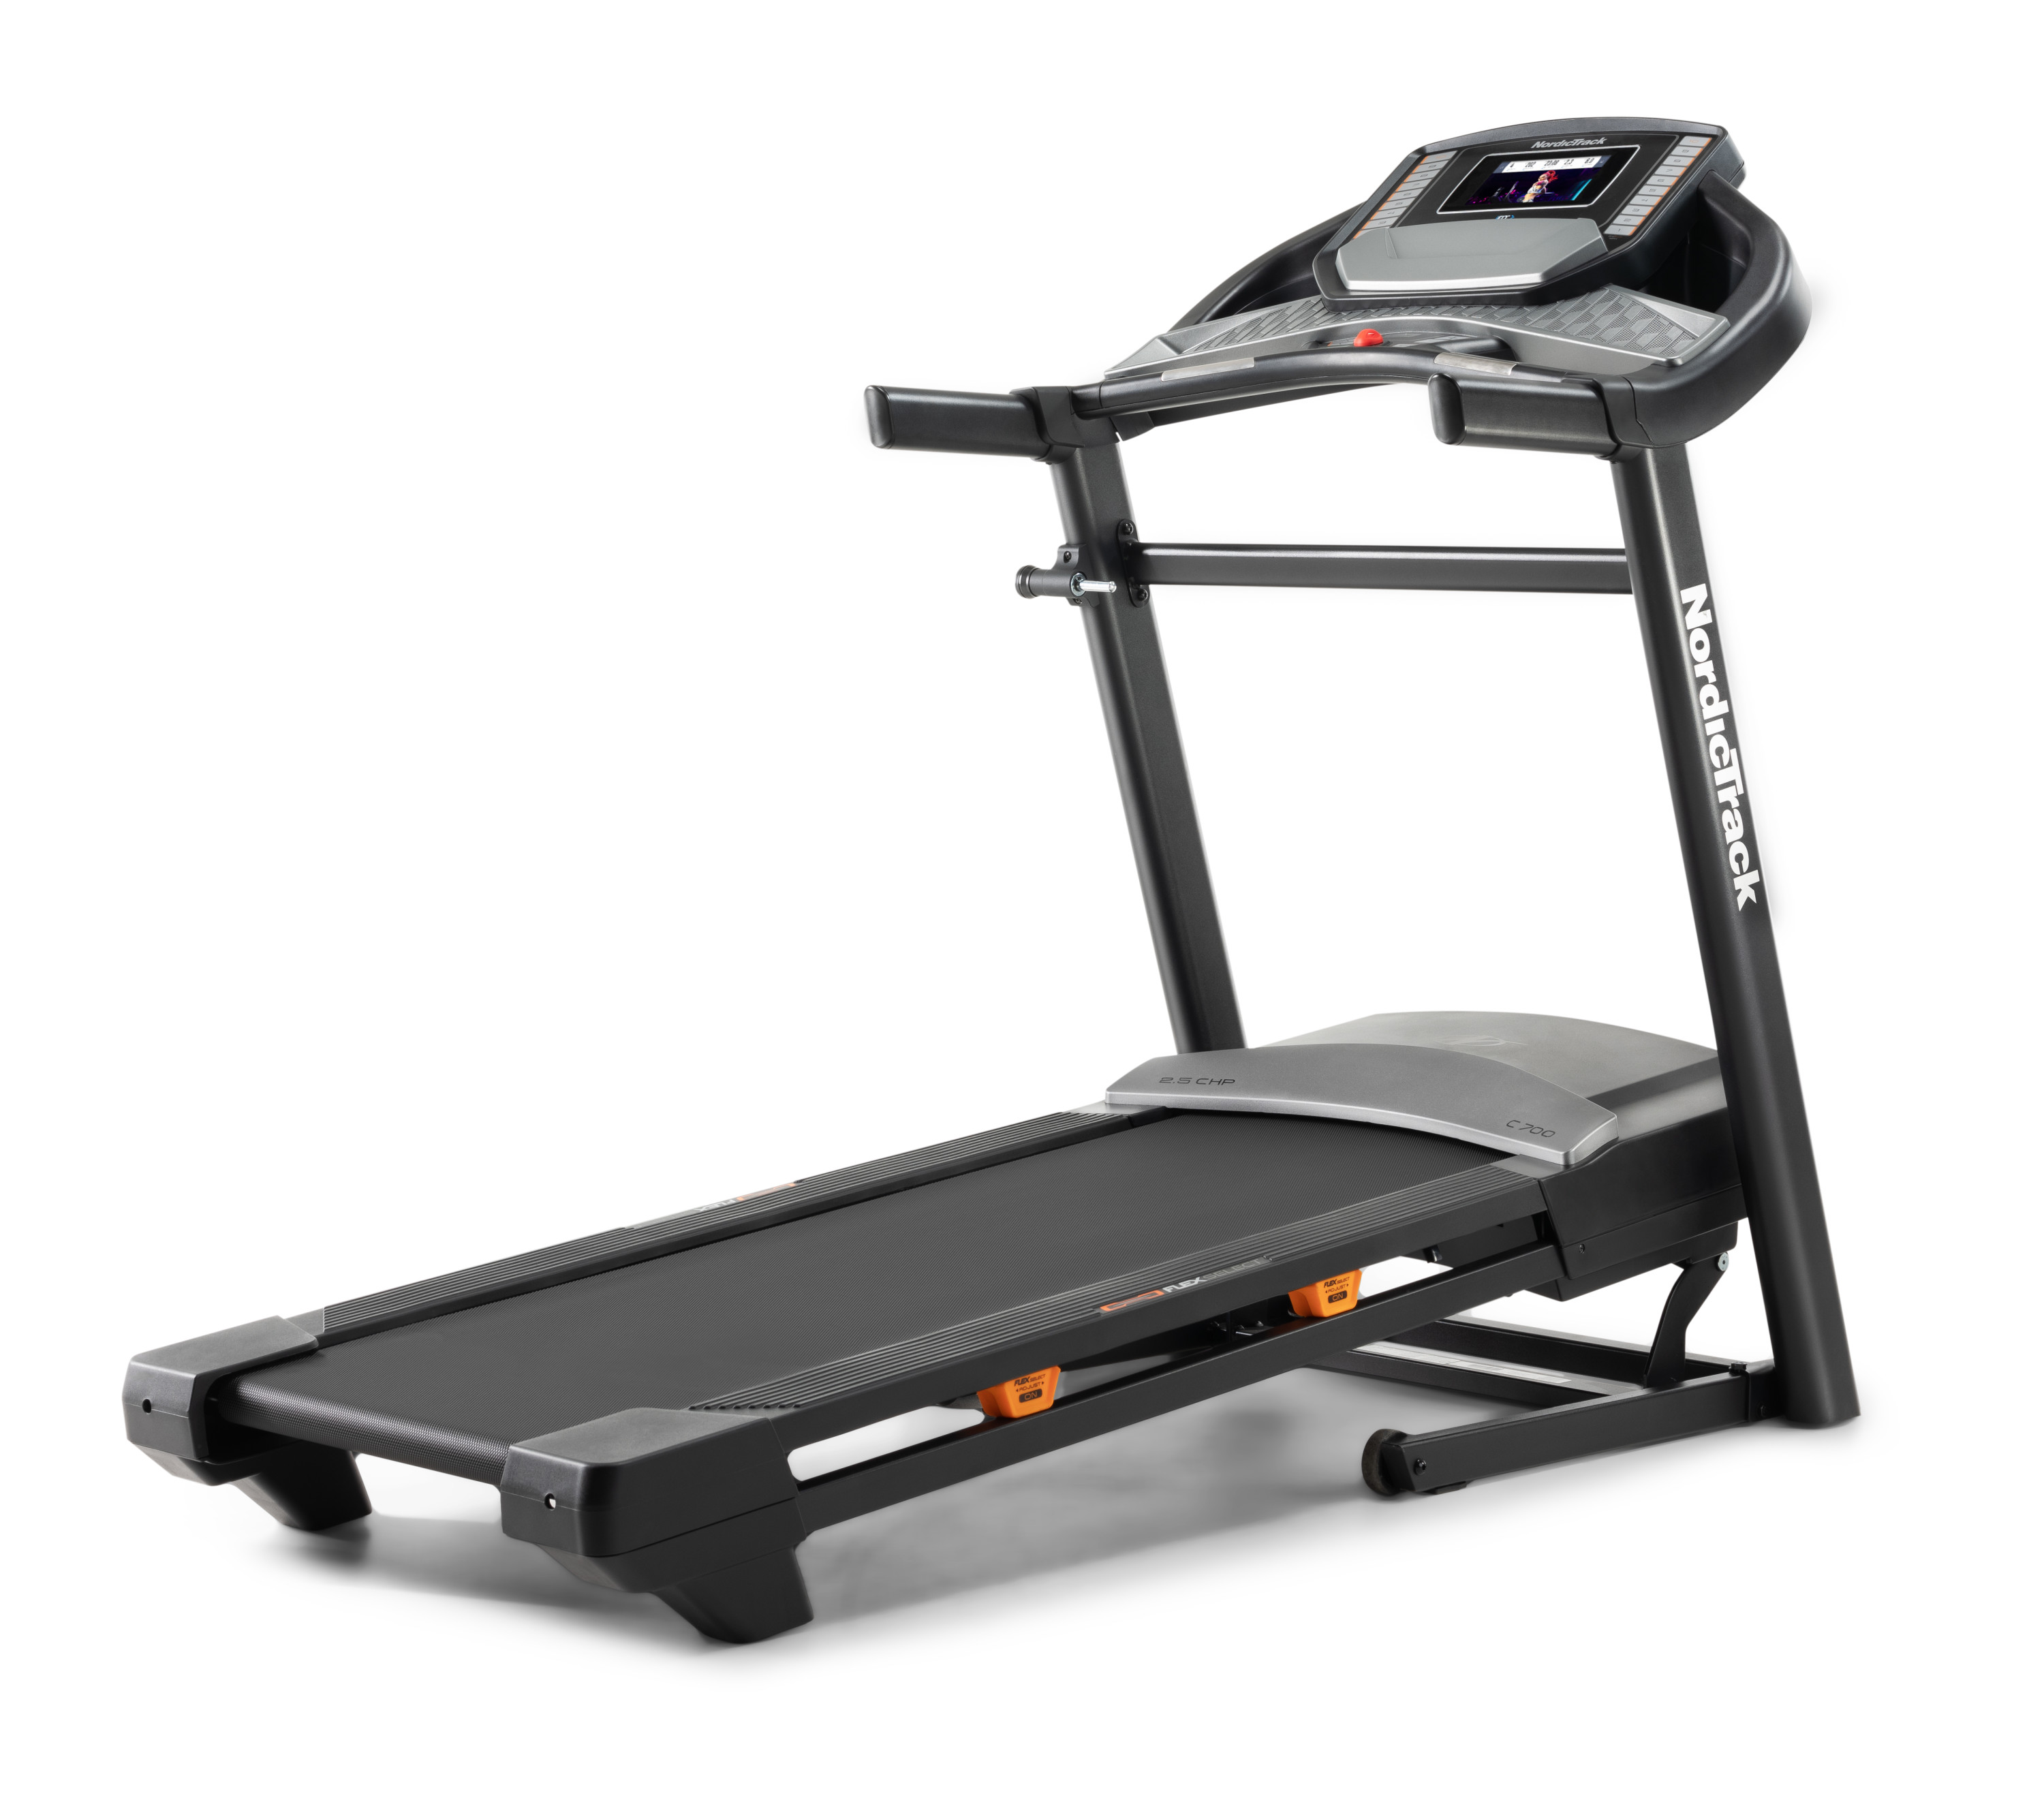 NordicTrack C 700 Folding Treadmill with 7” Interactive Touchscreen and 30-Day iFIT Membership - image 1 of 31